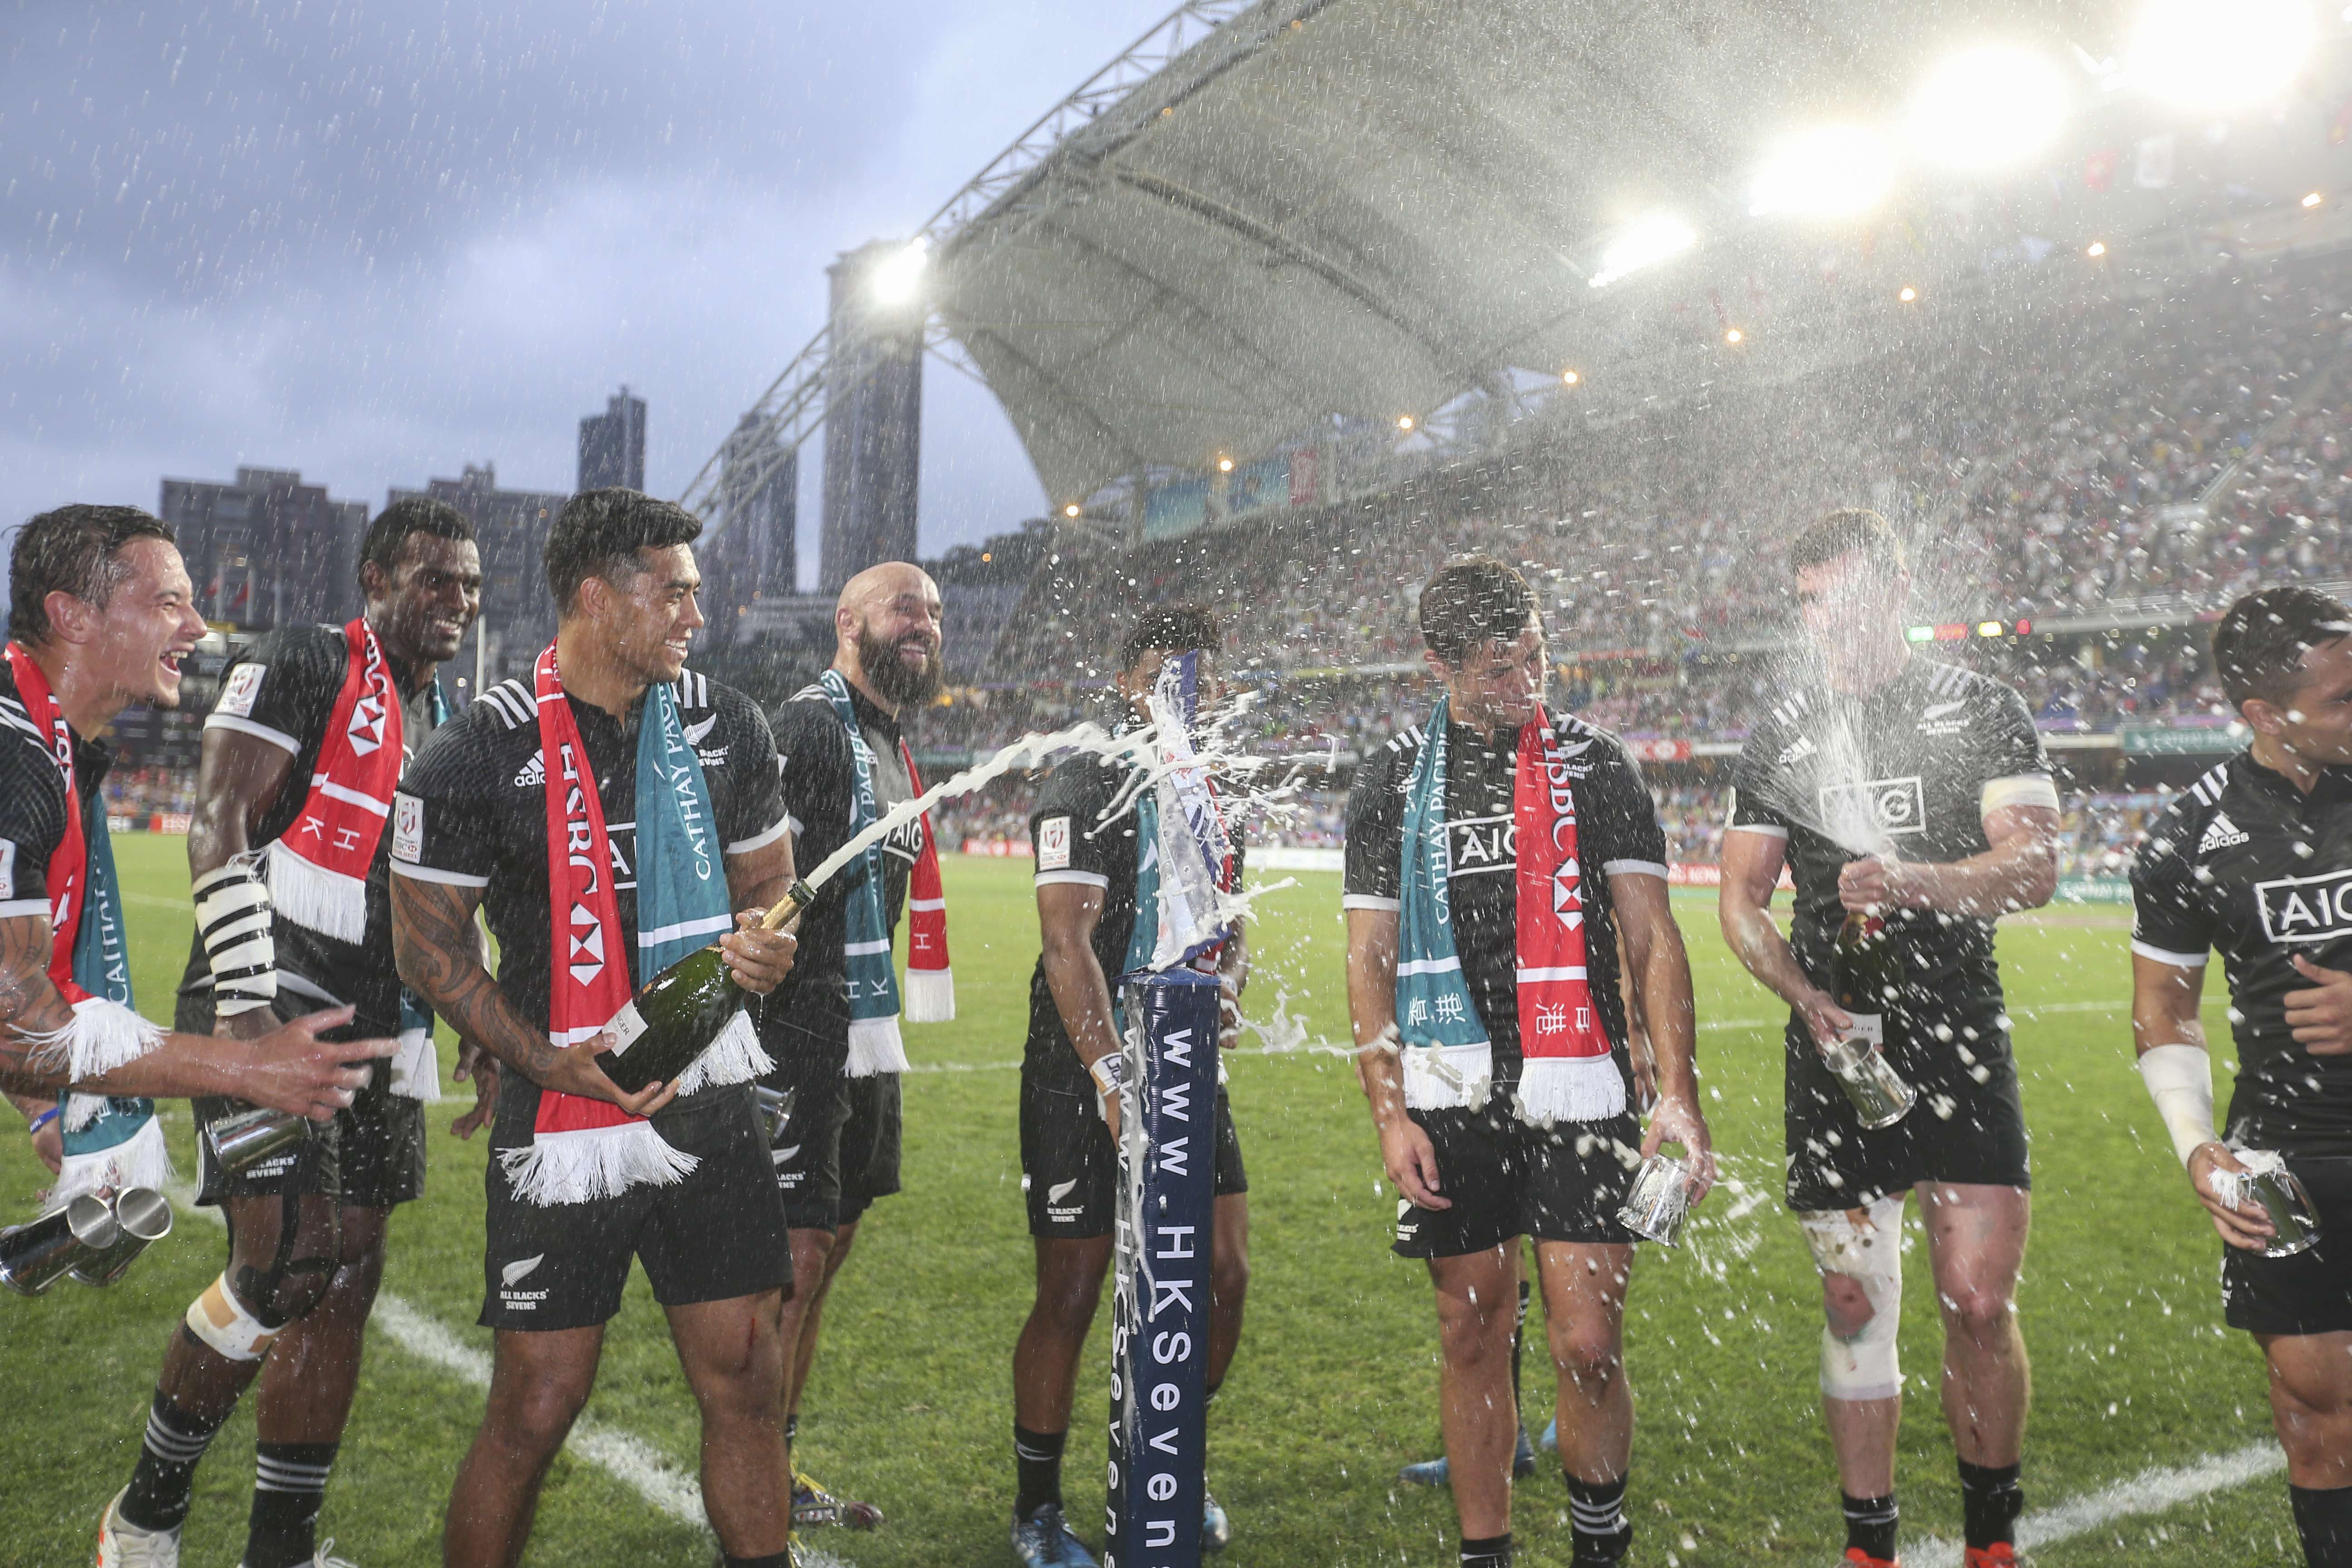 New Zealand celebrate their victory in the Plate over Argentina at the 2017 Hong Kong Sevens. Photo: Dickson Lee